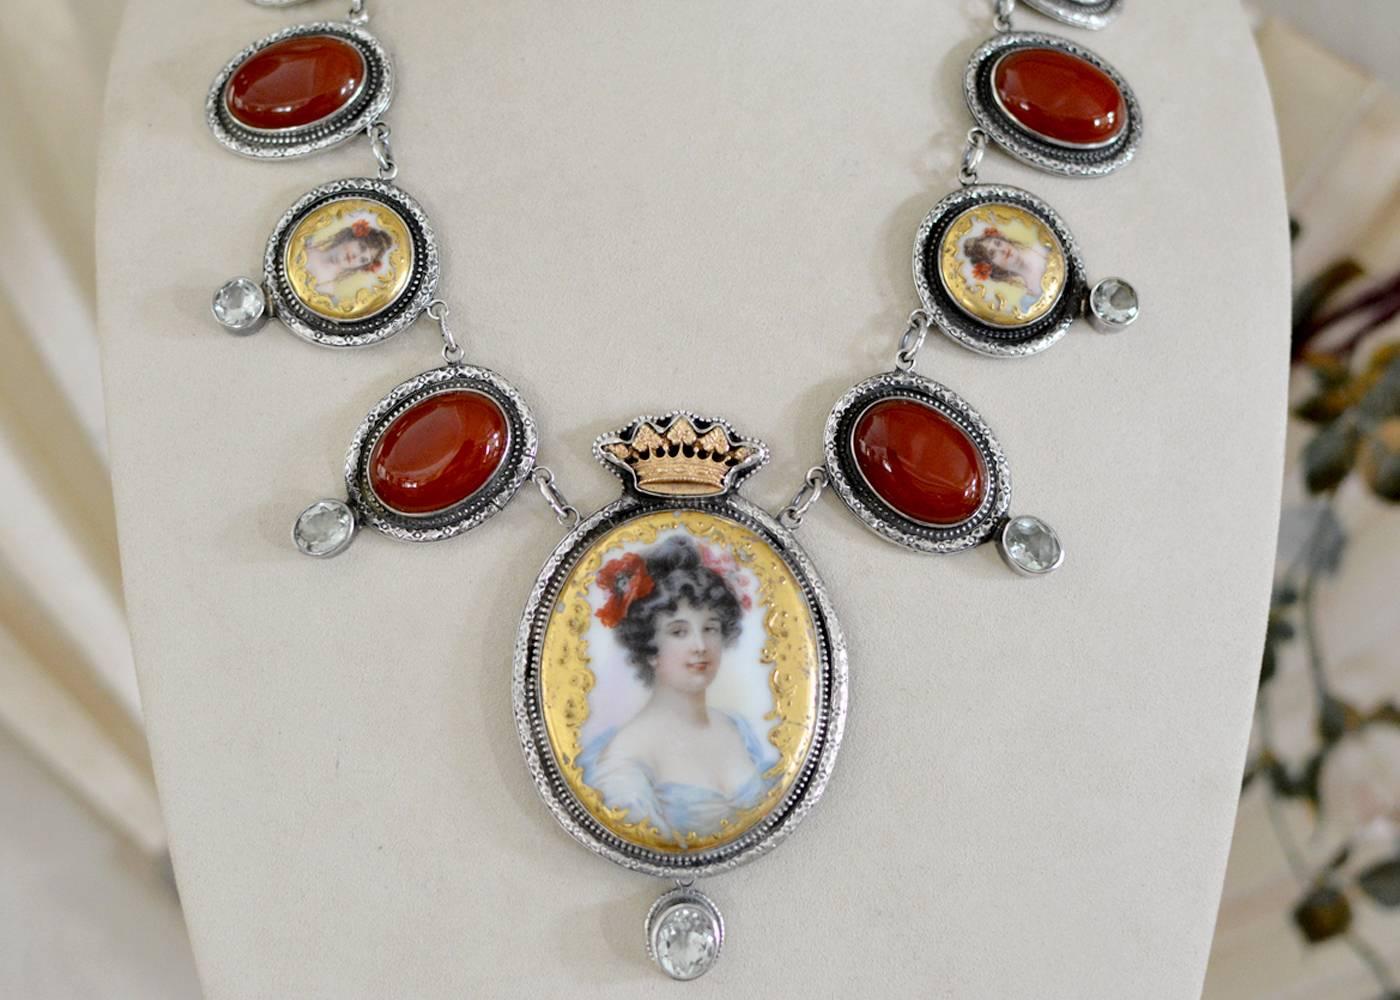 A French Limoges porcelain portrait, highly detailed with gold enamel forms the beautiful central element of this one of a kind drop necklace. A Goddess so lovely and regal that we have given her a bronze crown and added a faceted natural green